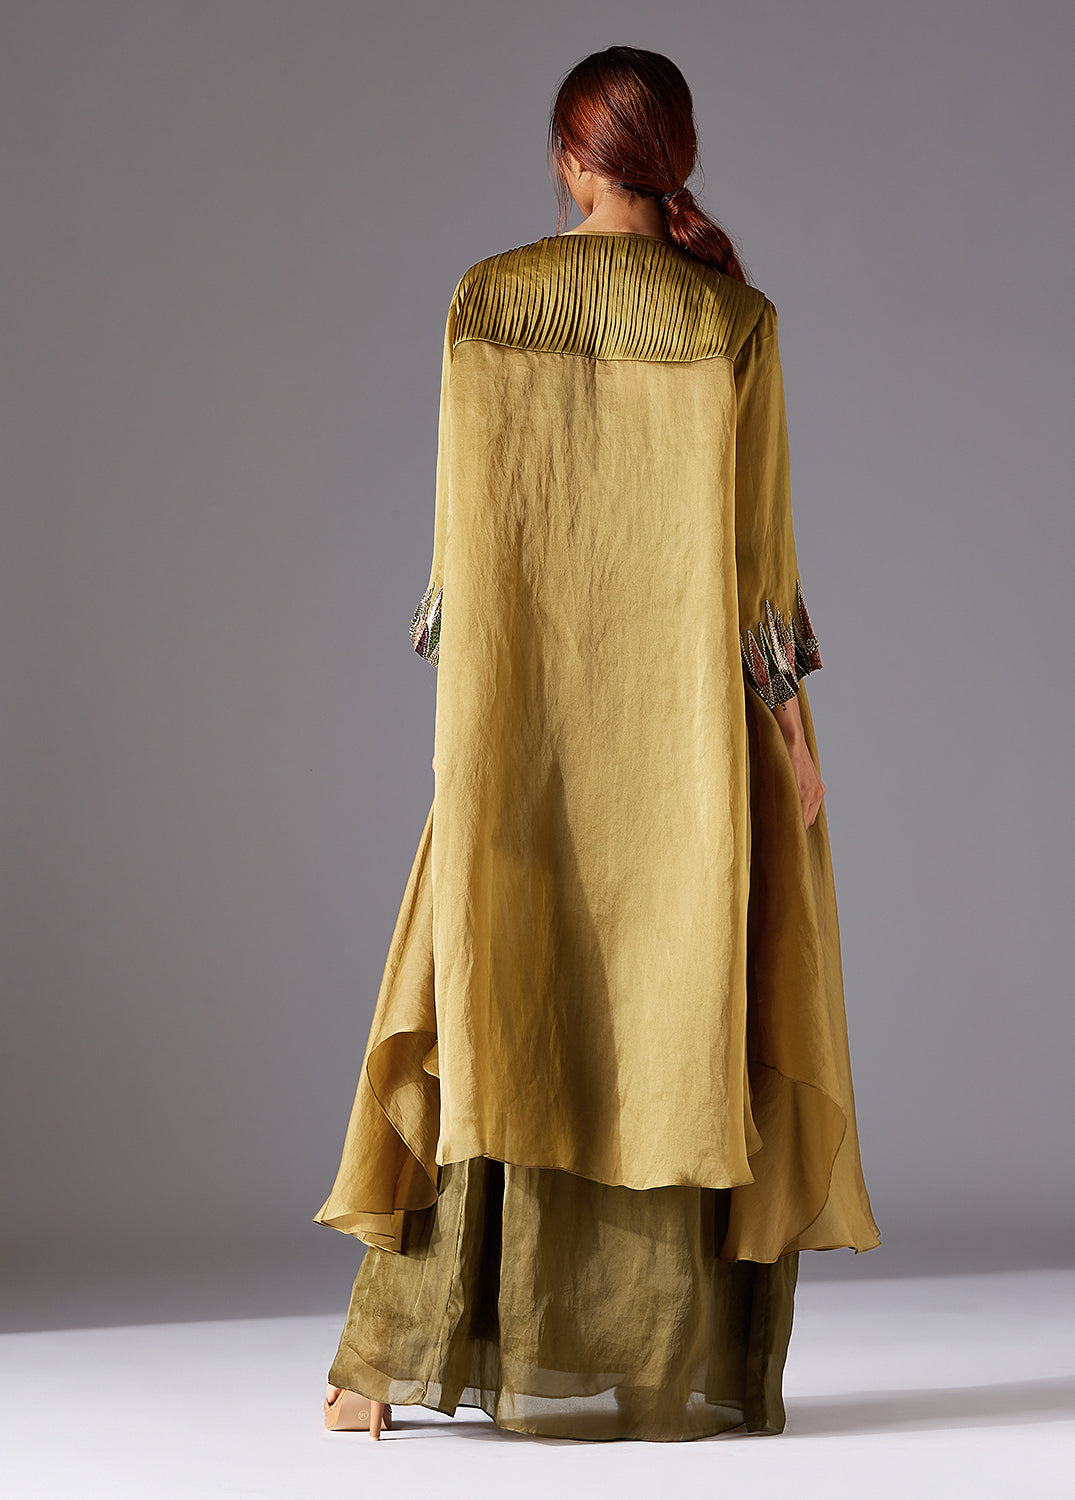 Hamada Cape with Forestland 3-tiered Dress and Metallic belt